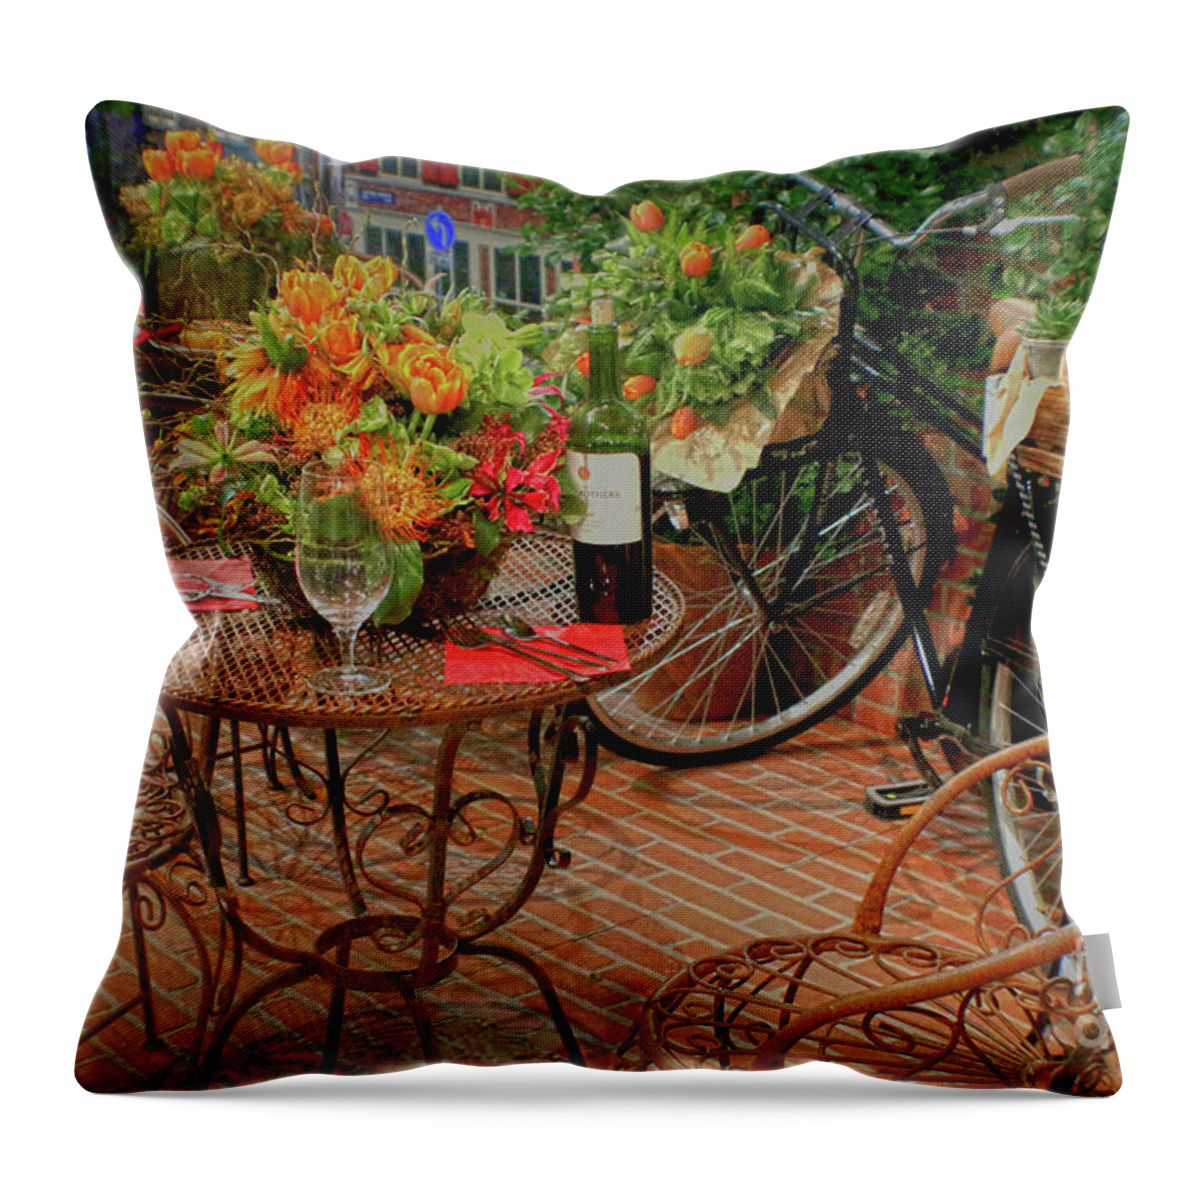 Cafe Throw Pillow featuring the photograph Cafe Dutch Style by Sandy Moulder